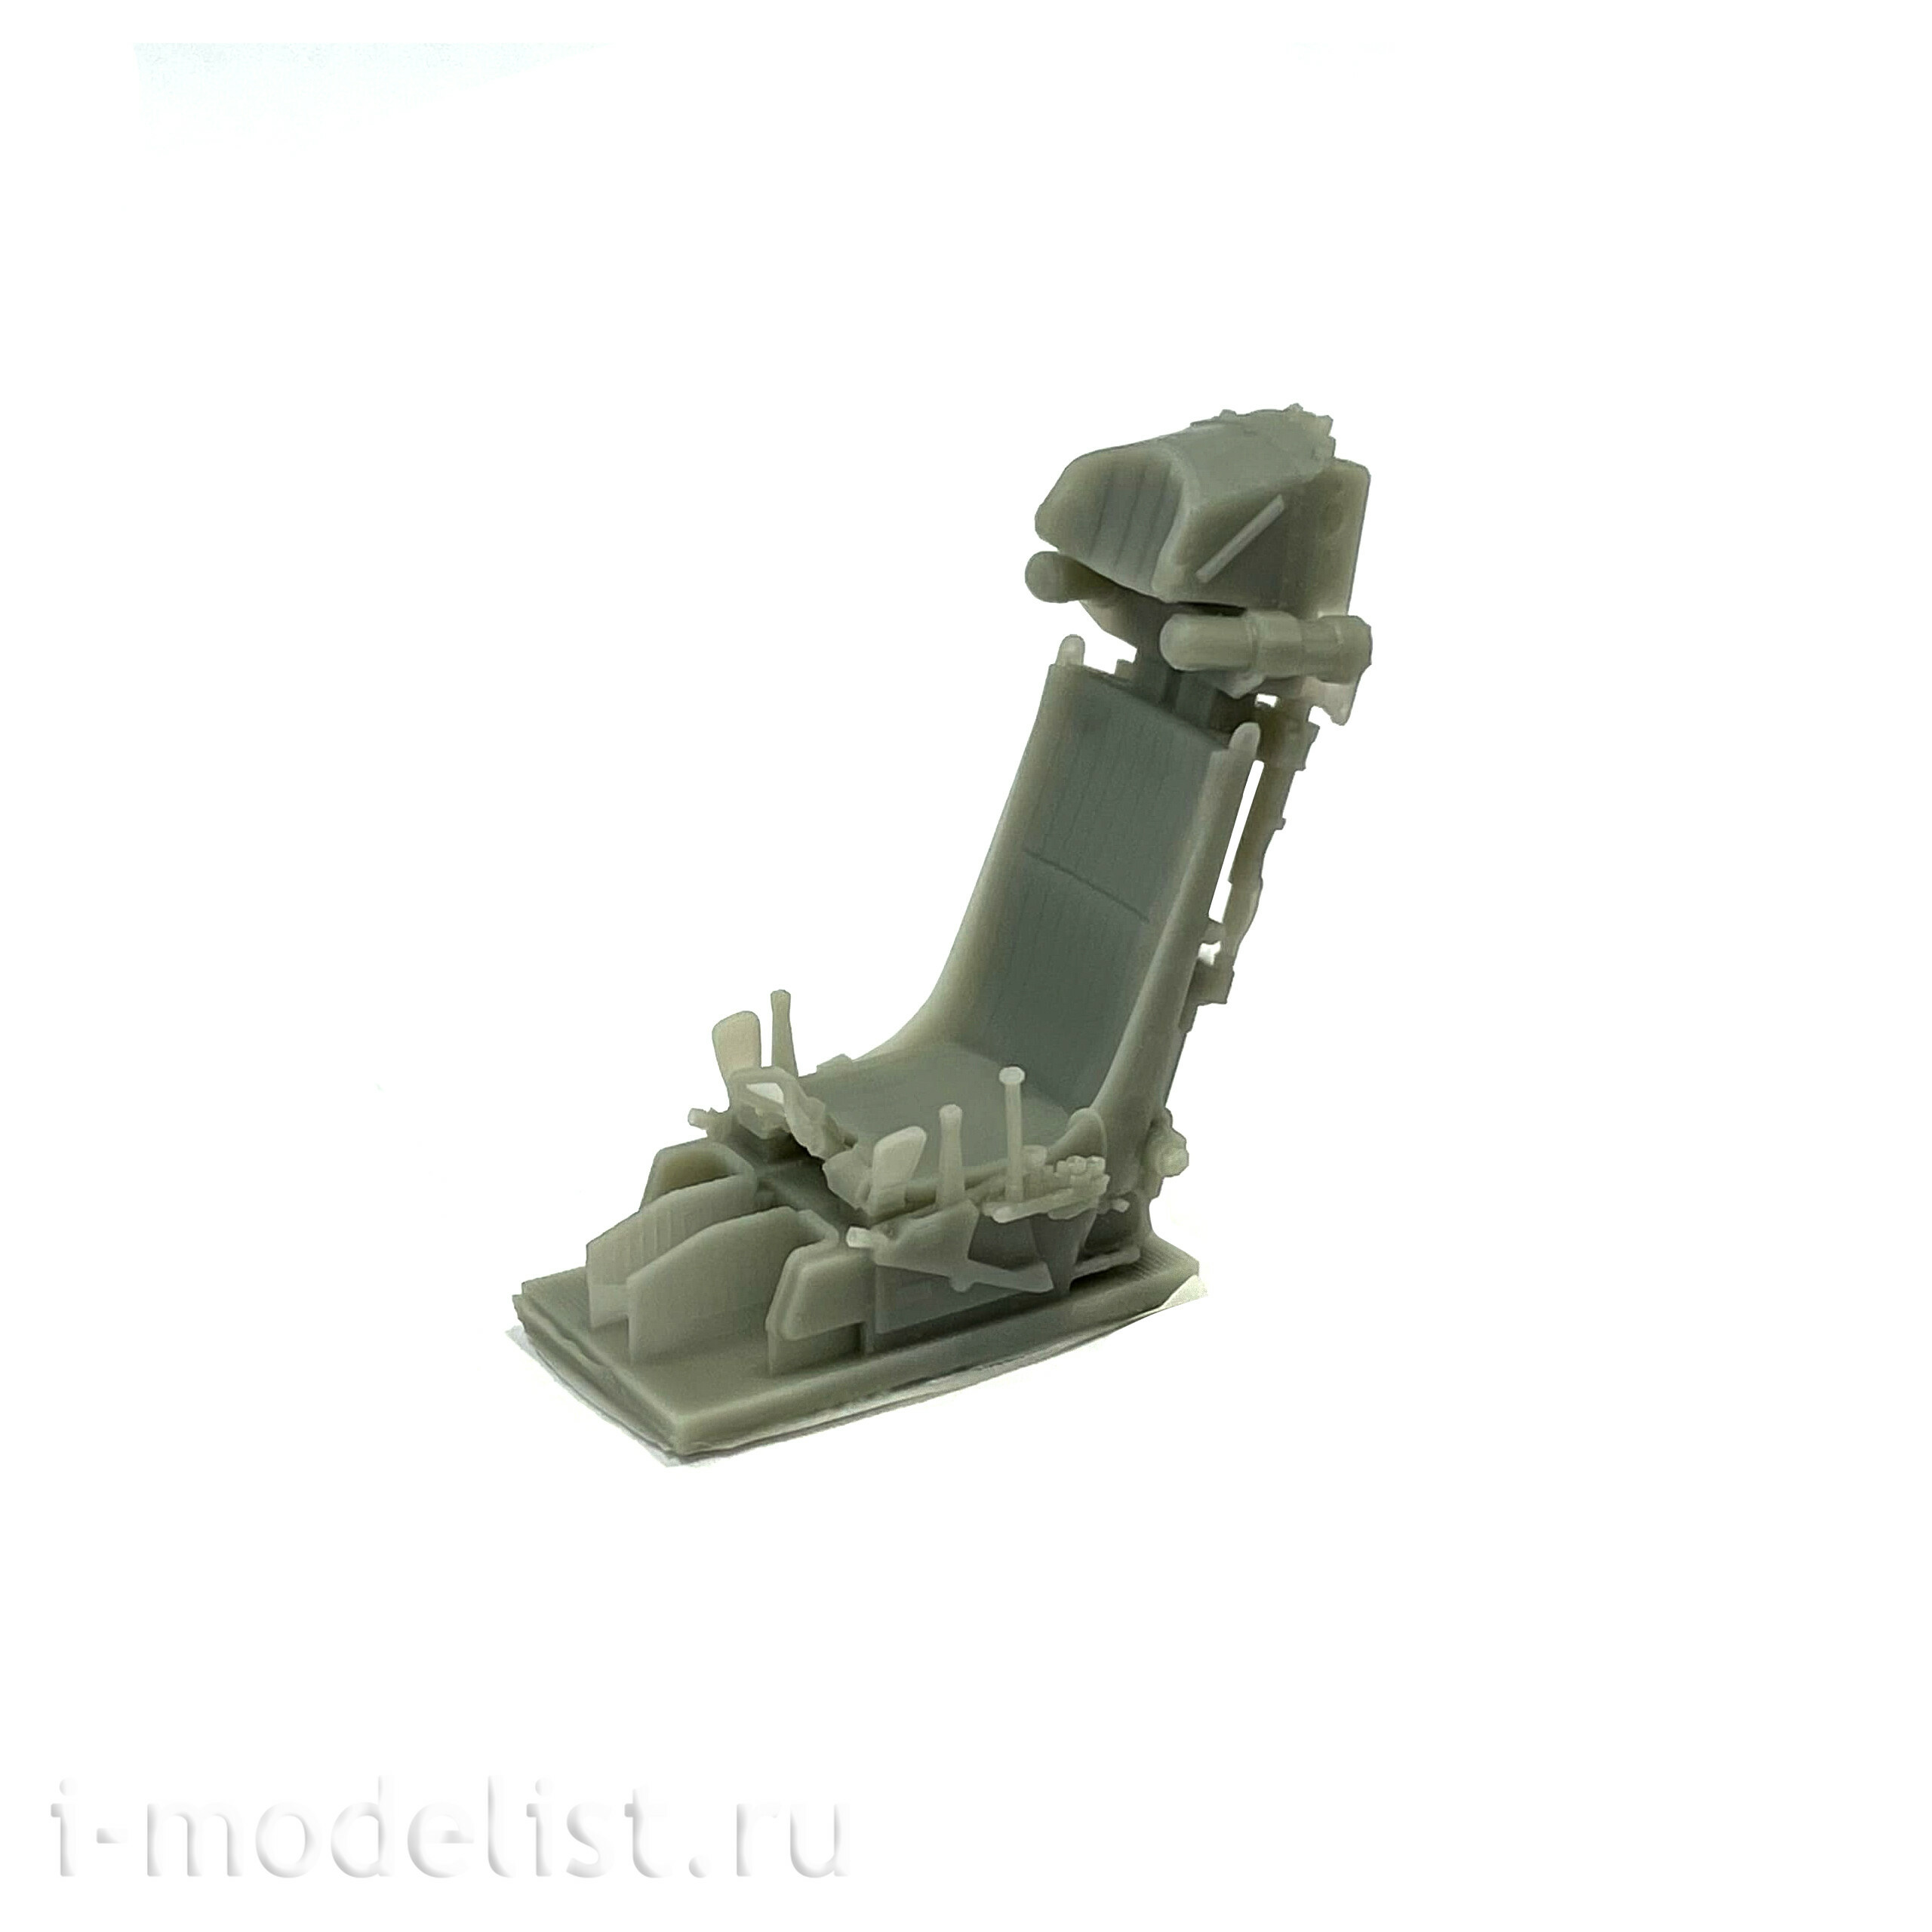 RS48020 E.V.M. 1/48Highly detailed resin chair K-36L for the Soviet Su-25 attack aircraft model of the Zvezda company with photo etching straps.